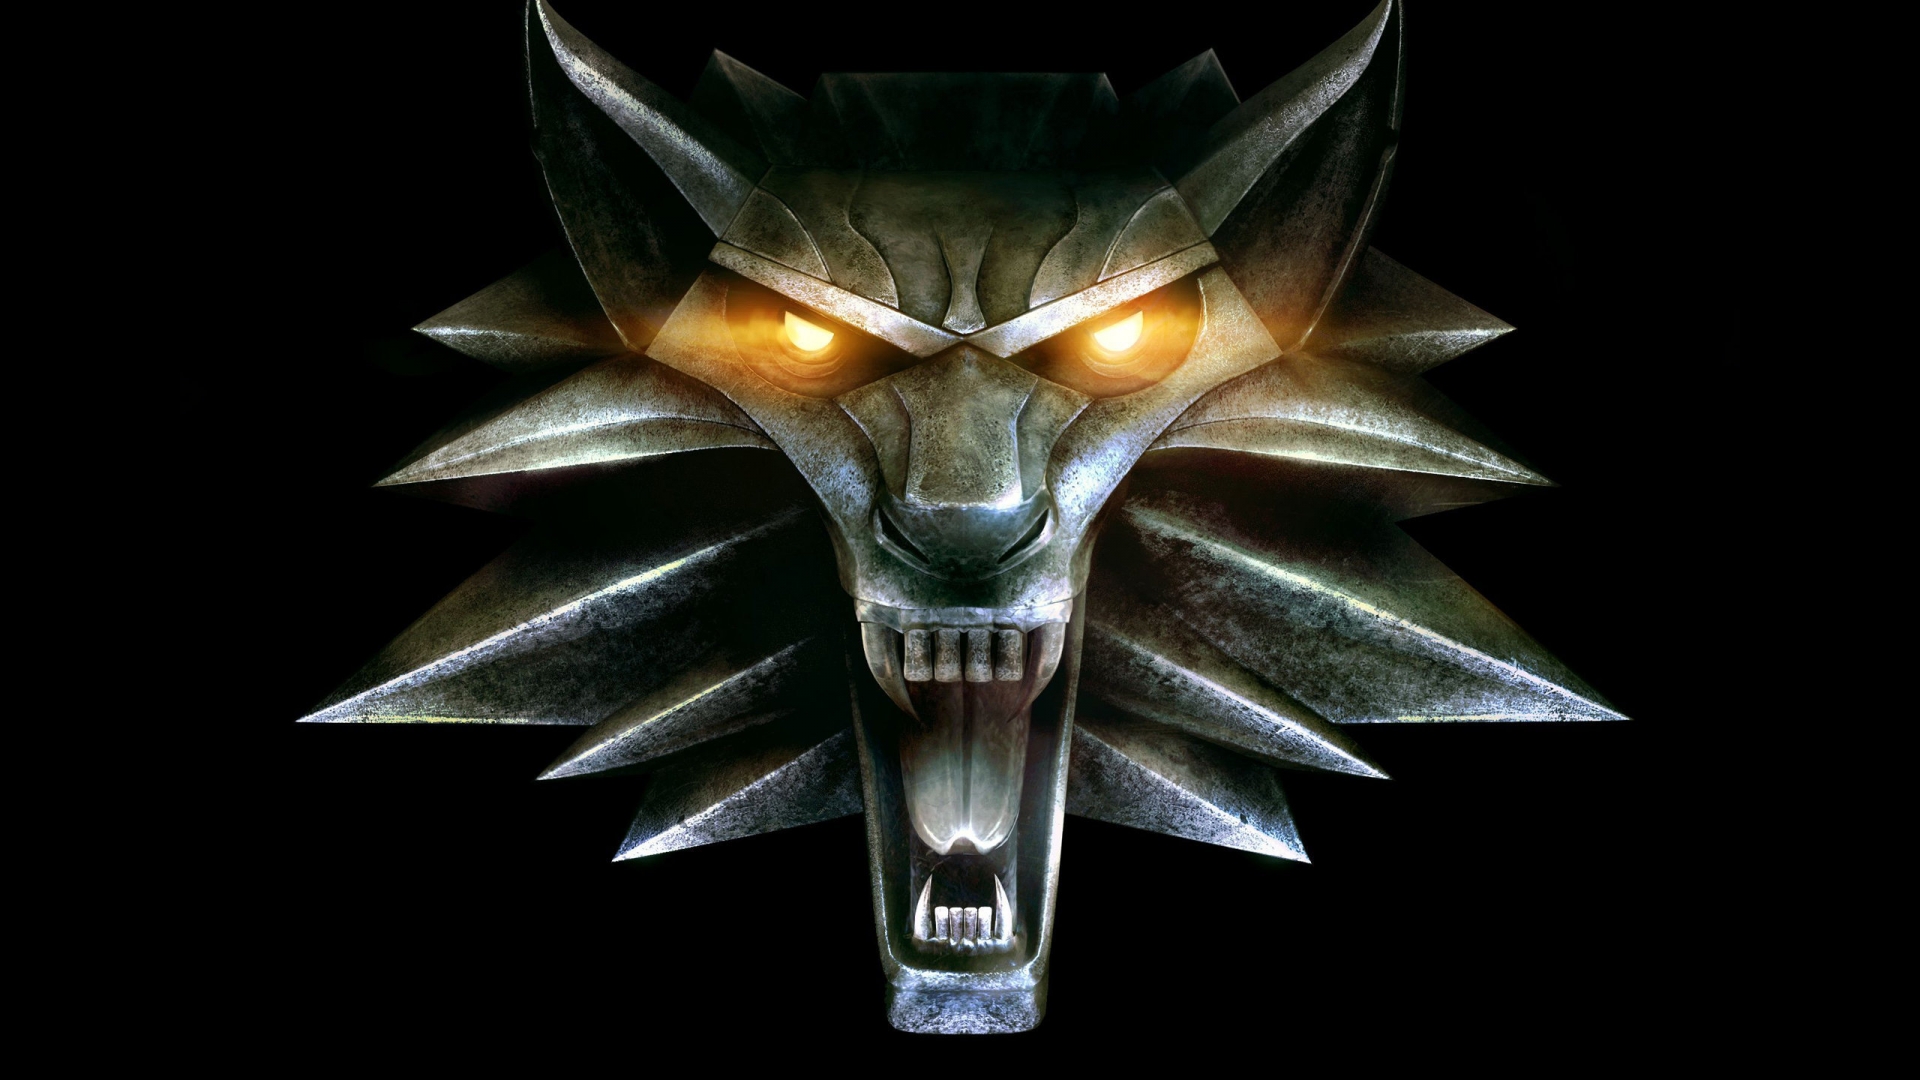 Iron head Wolf for 1920 x 1080 HDTV 1080p resolution